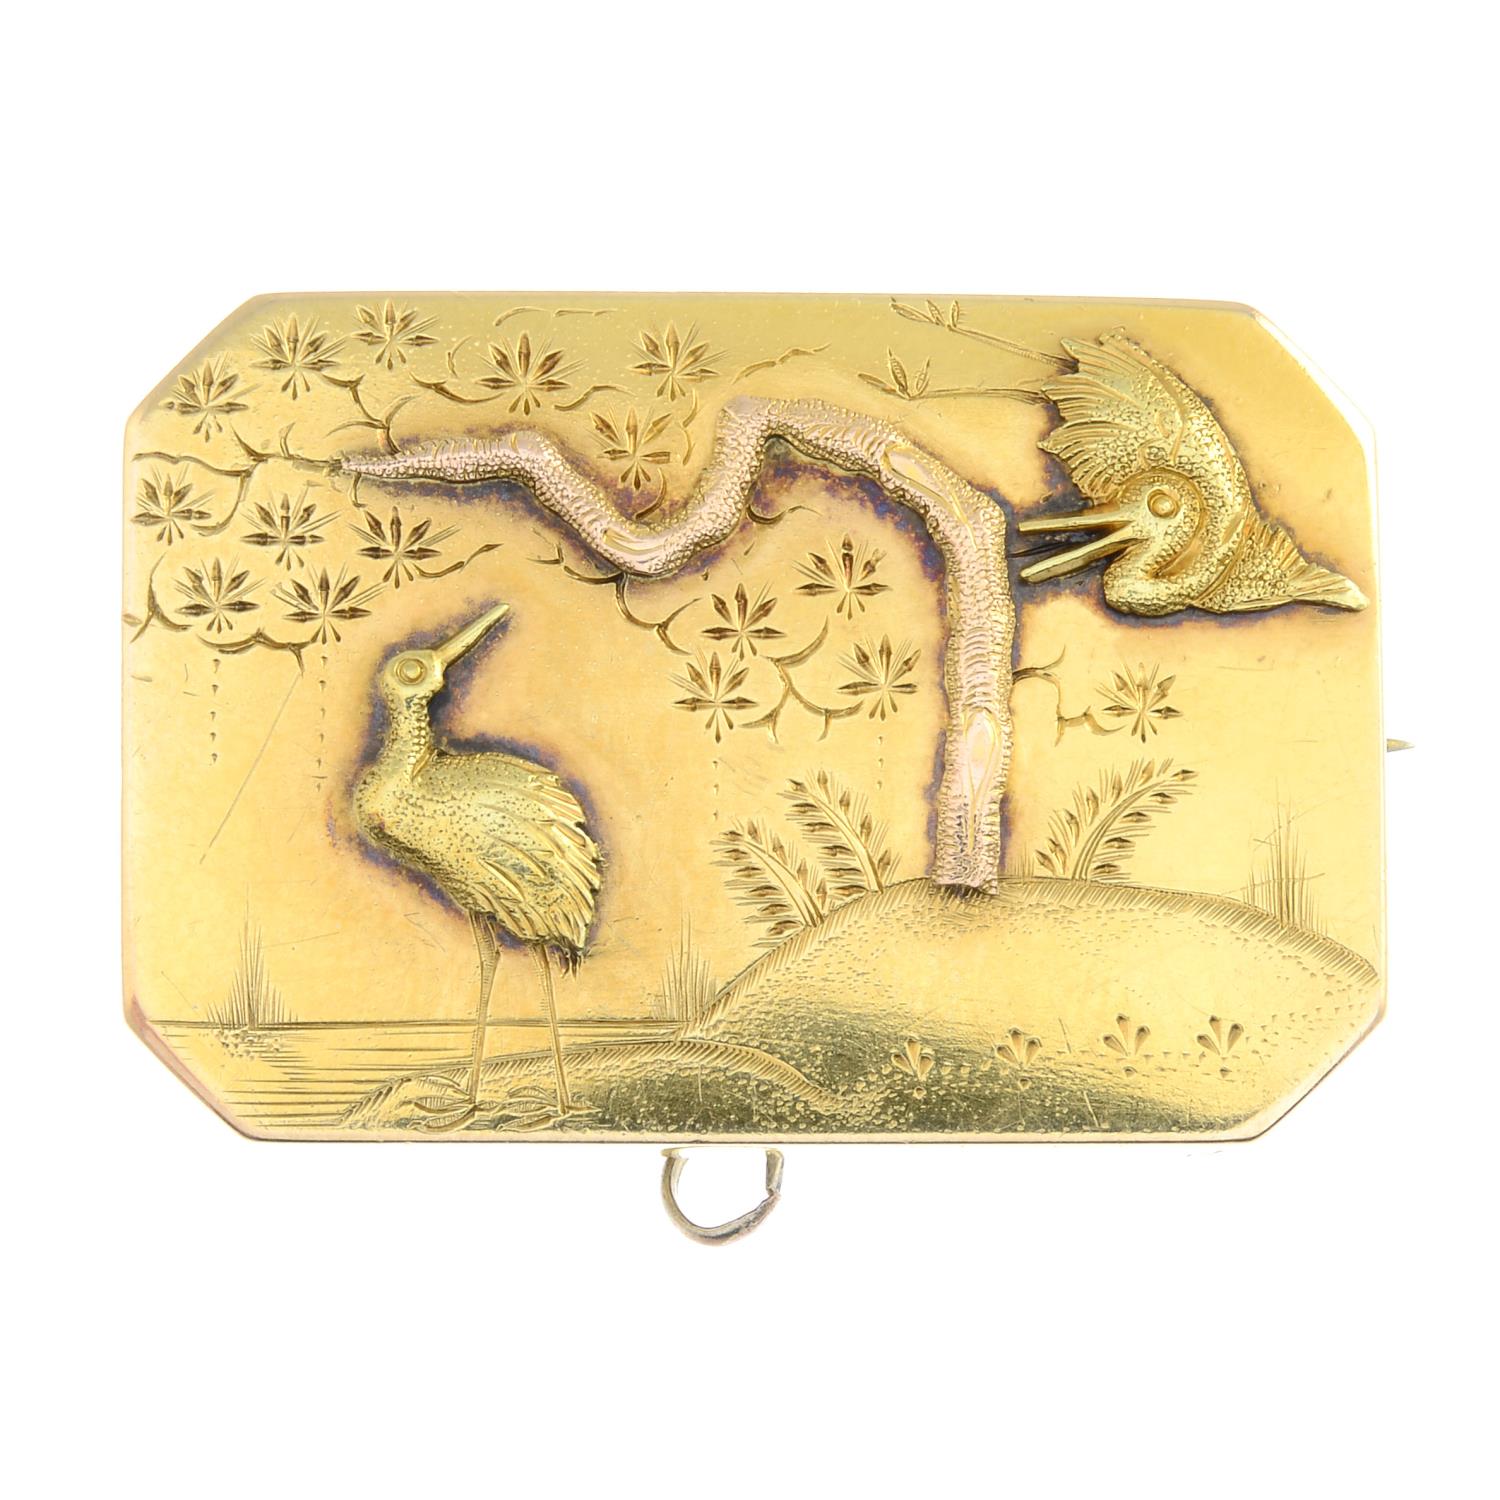 A Victorian gold brooch, designed to depict two cranes in a landscape.